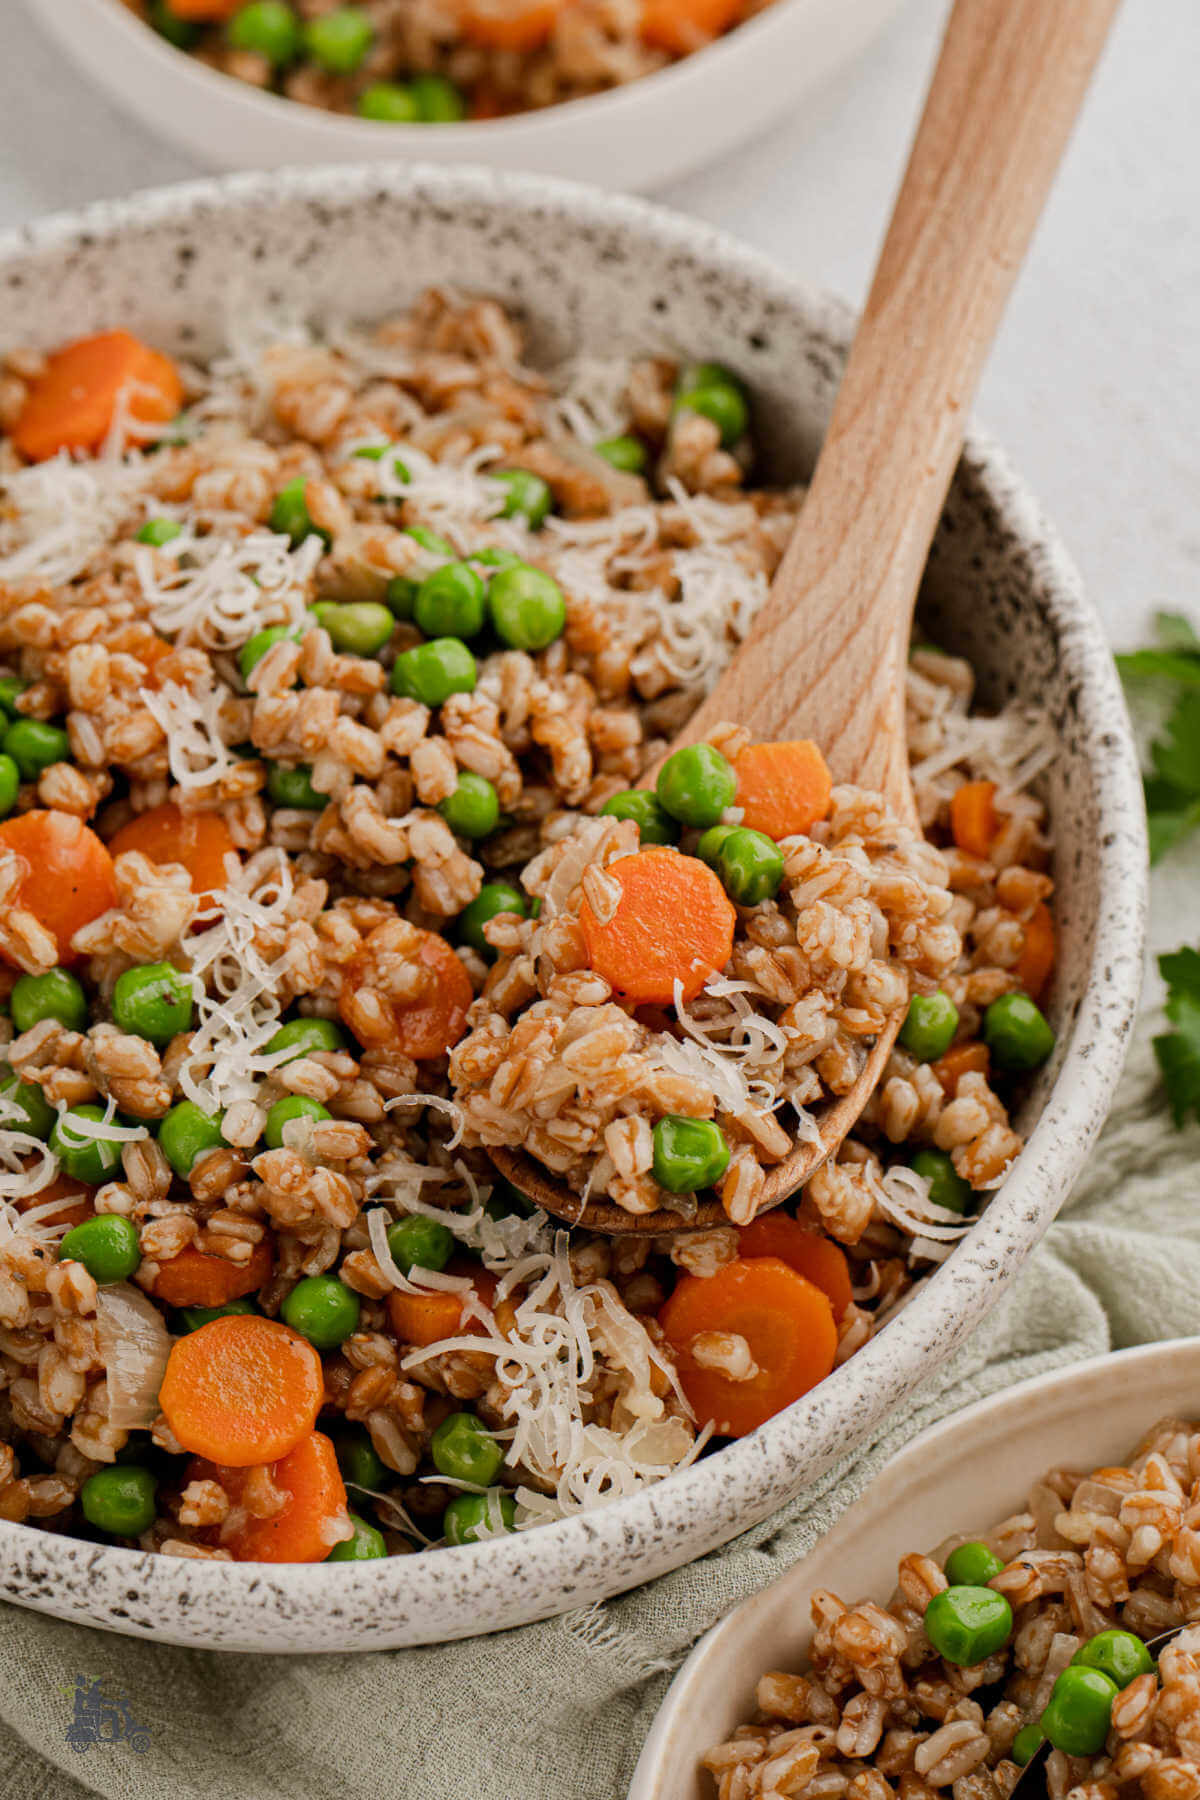 A serving bowl of farro, peas, and carrots made into the classic Italian recipe of Risi Bisi.